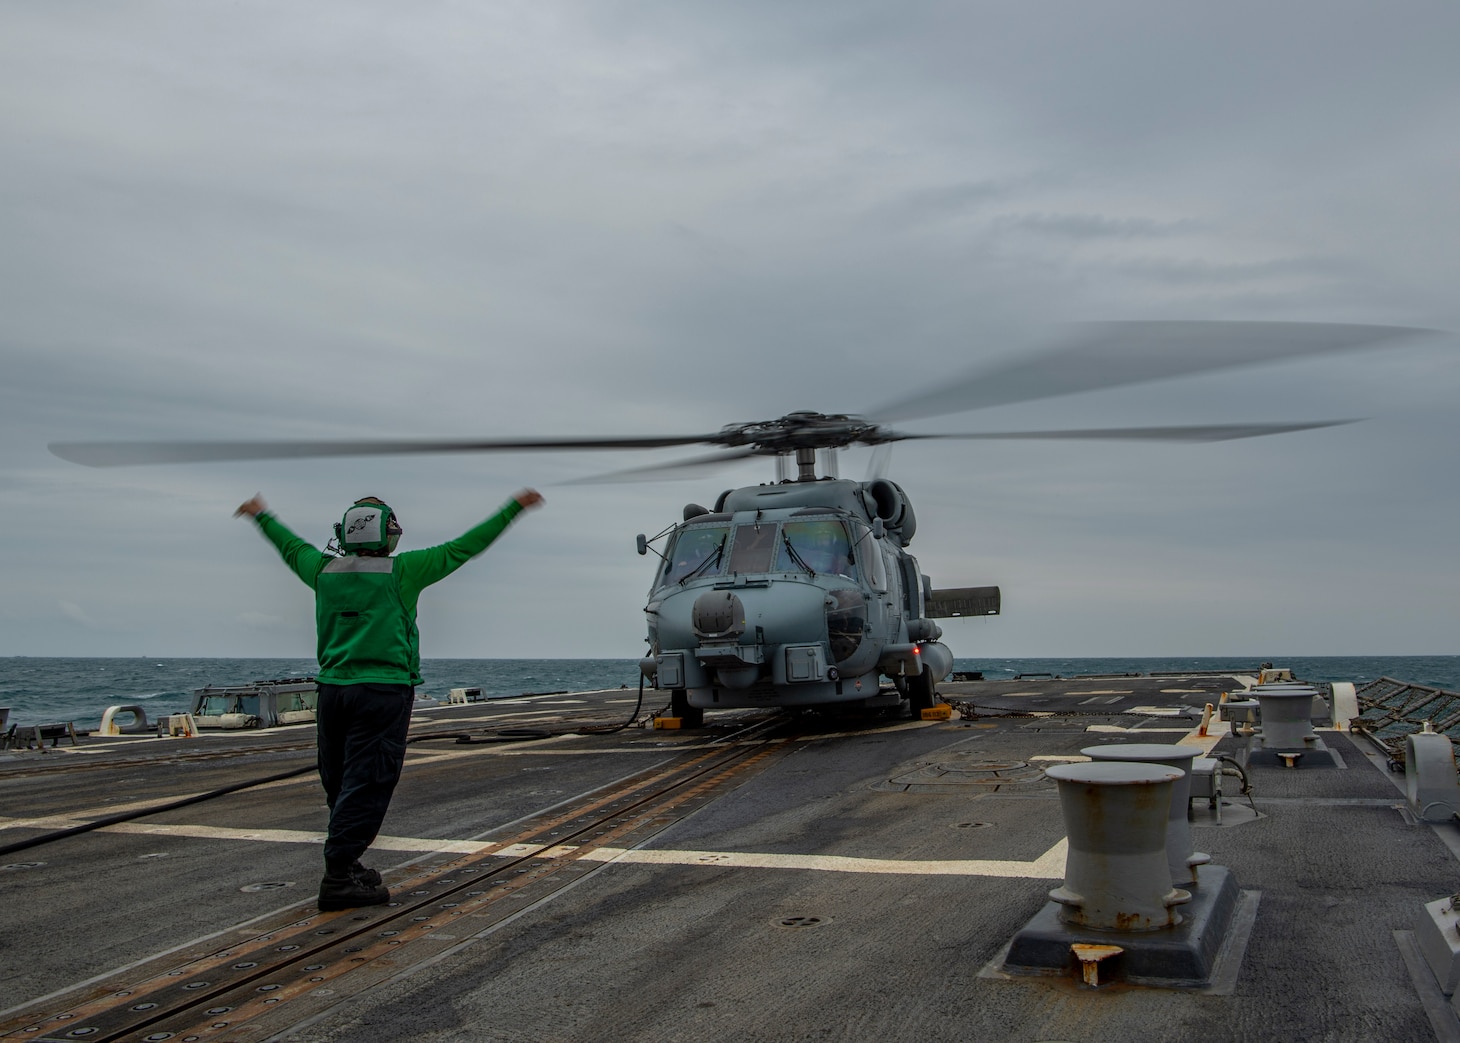 210310-N-SS350-1022 EAST CHINA SEA (March 10, 2021) U.S. Navy Aviation Electrician’s Mate 2nd Class Elizabeth Larson, from Porter, Texas, assigned to the “Magicians” of Helicopter Maritime Strike Squadron (HSM) 35, signals to the pilots in an MH-60R Sea Hawk on the flight deck of the Arleigh Burke-class guided-missile destroyer USS John Finn (DDG 113) March 10, 2021. John Finn, part of the Theodore Roosevelt Carrier Strike Group, is on a scheduled deployment to the U.S. 7th Fleet area of operations. As the U.S. Navy’s largest forward-deployed fleet, 7th Fleet routinely operates and interacts with 35 maritime nations while conducting missions to preserve and protect a free and open Indo-Pacific Region. (U.S. Navy photo by Mass Communication Specialist 3rd Class Jason Waite)